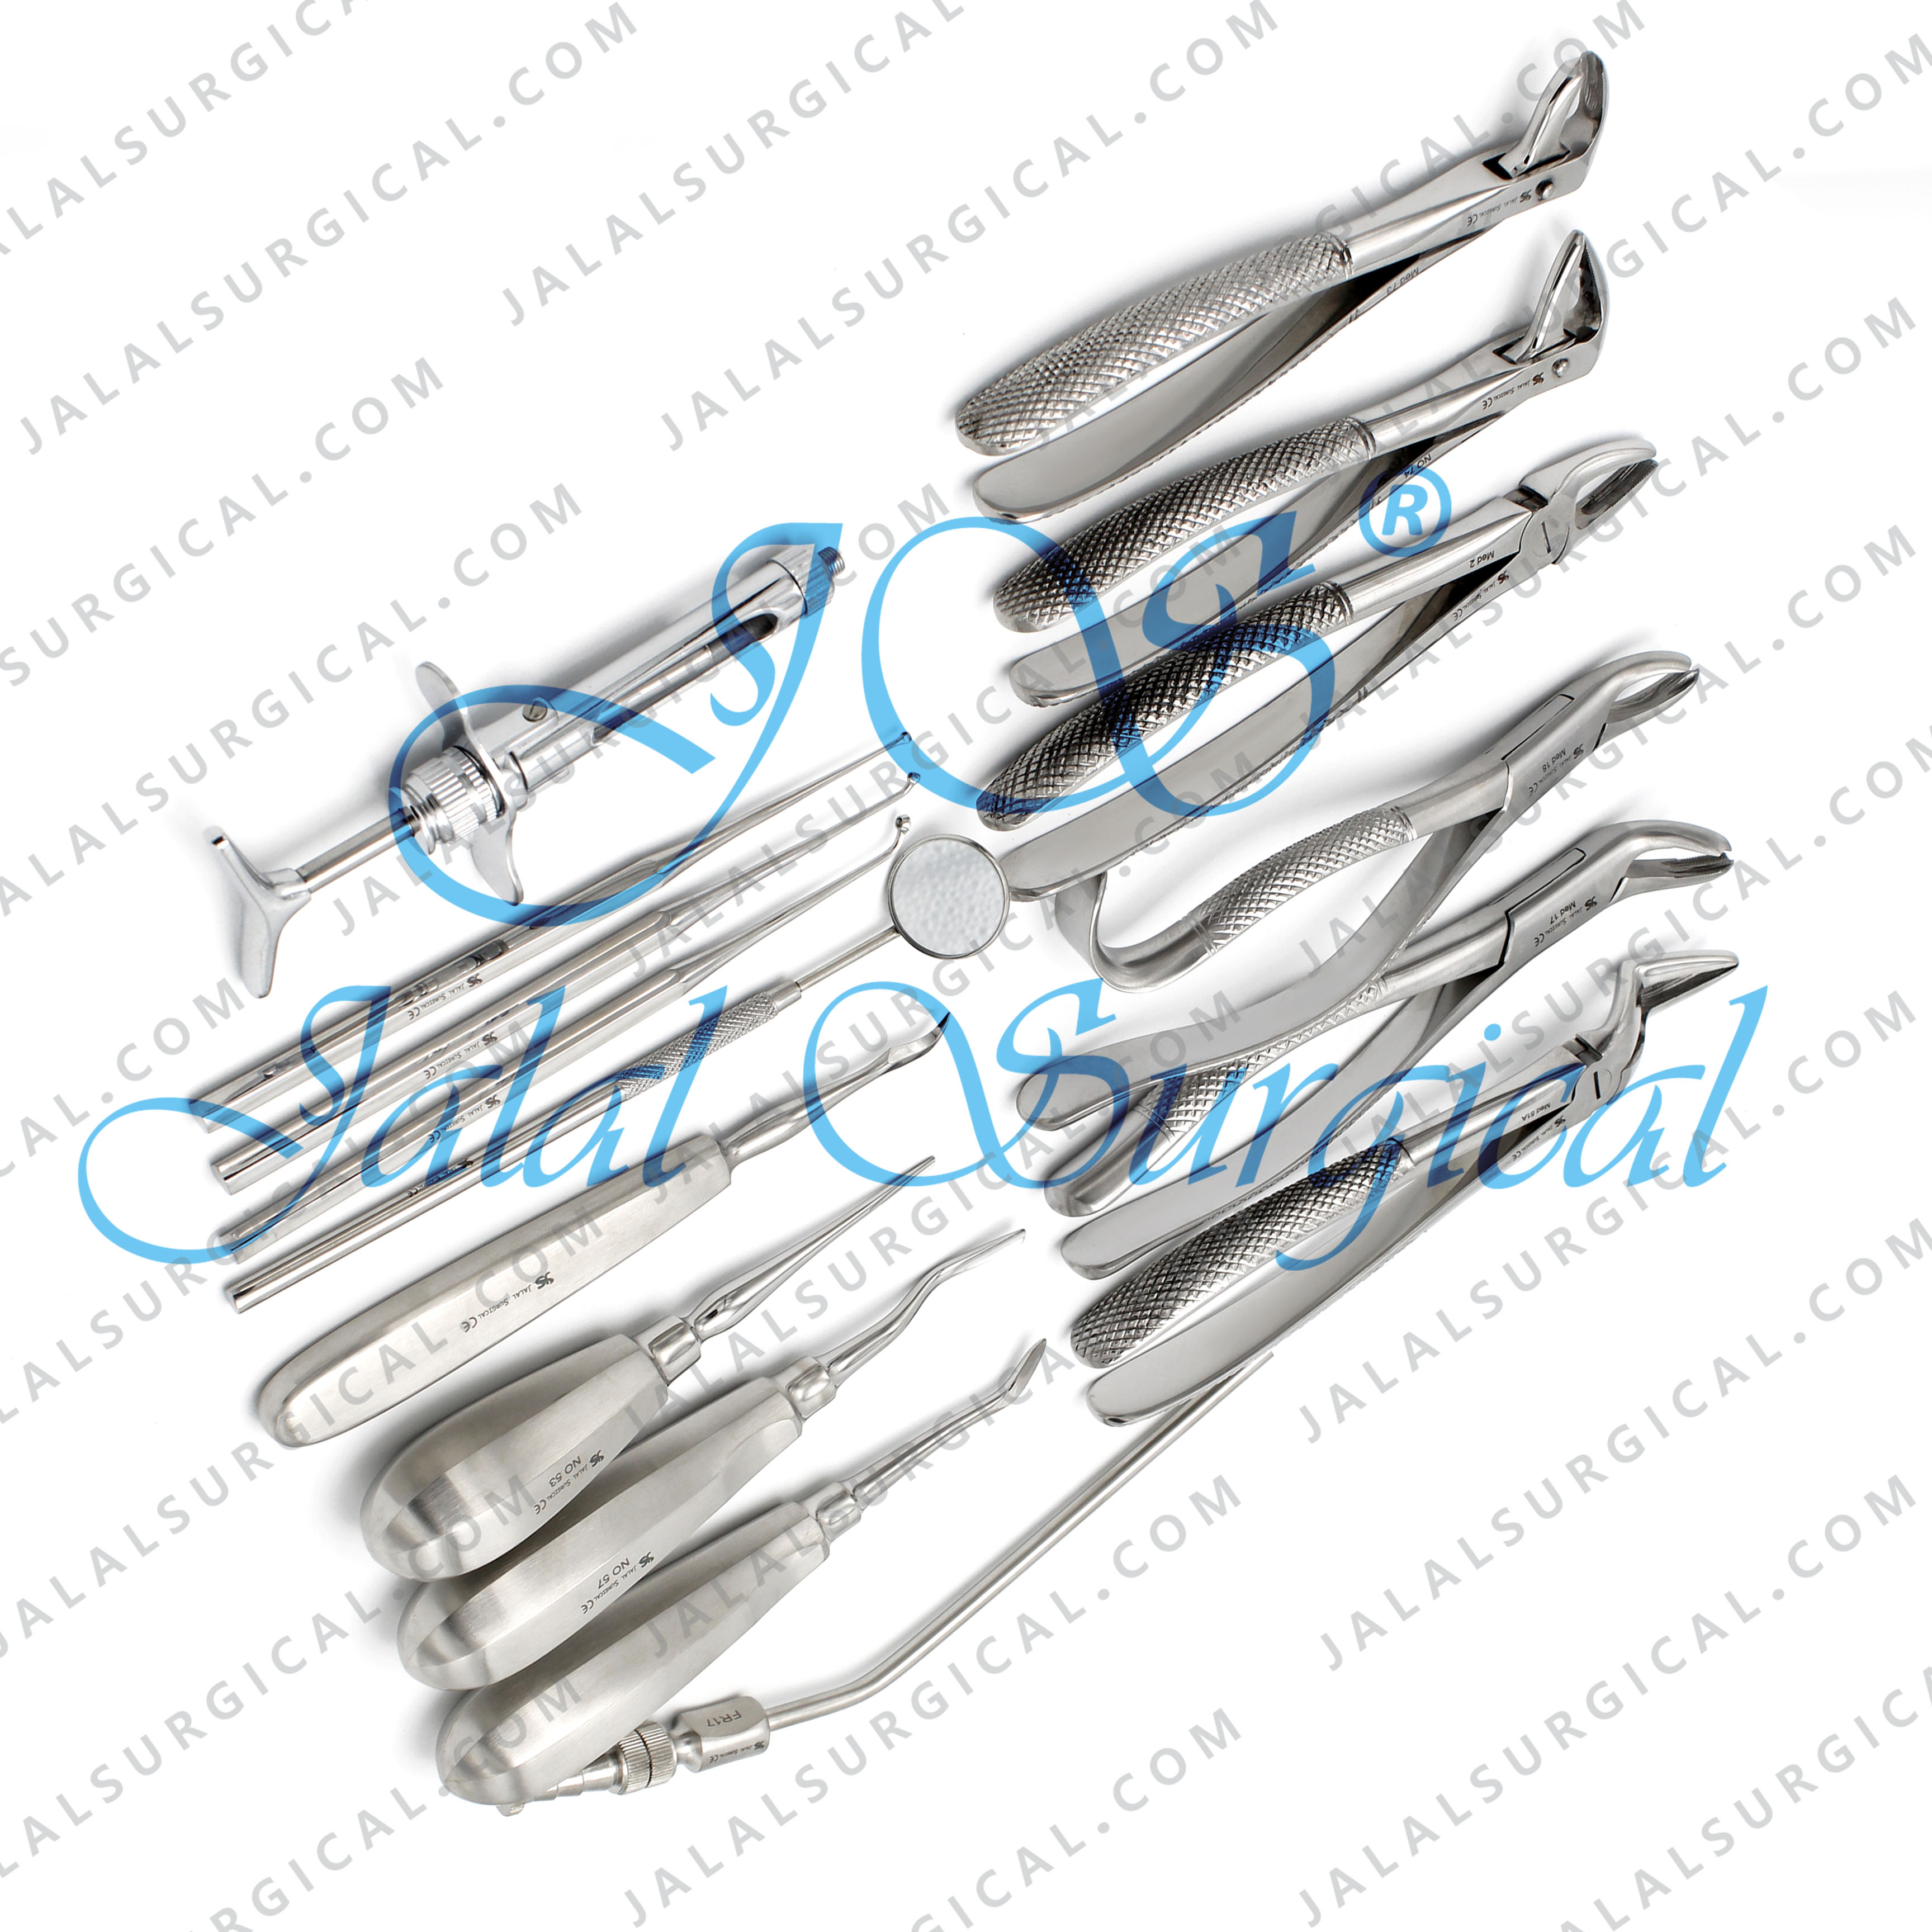 Dental Tooth Extraction Tool Kit Of 18 Pieces - Jalal Surgical